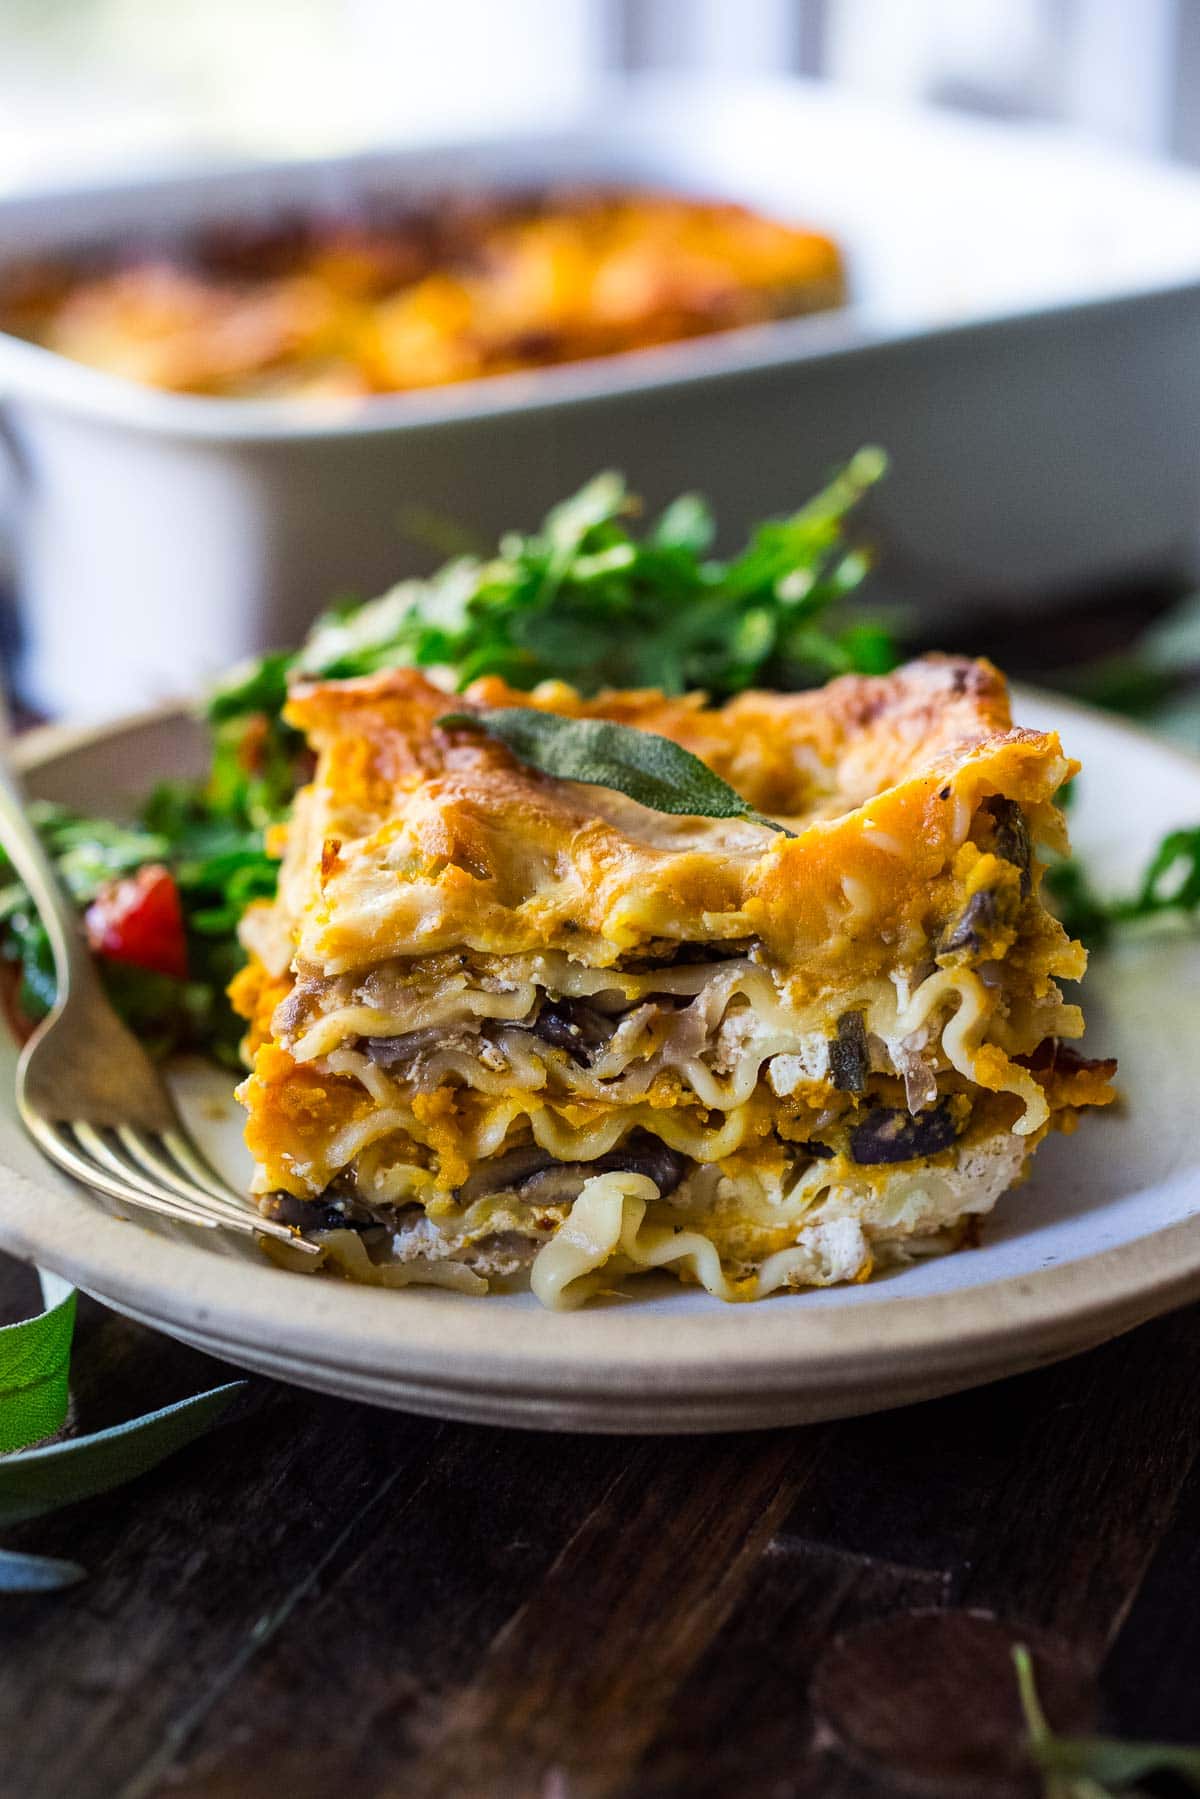 This Butternut Squash Lasagna recipe is a cozy and heartwarming vegetarian meal, made with a creamy roasted butternut squash sauce, no-boil noodles, mushrooms, spinach, ricotta, and crispy sage. Video + Vegan-adaptable. 